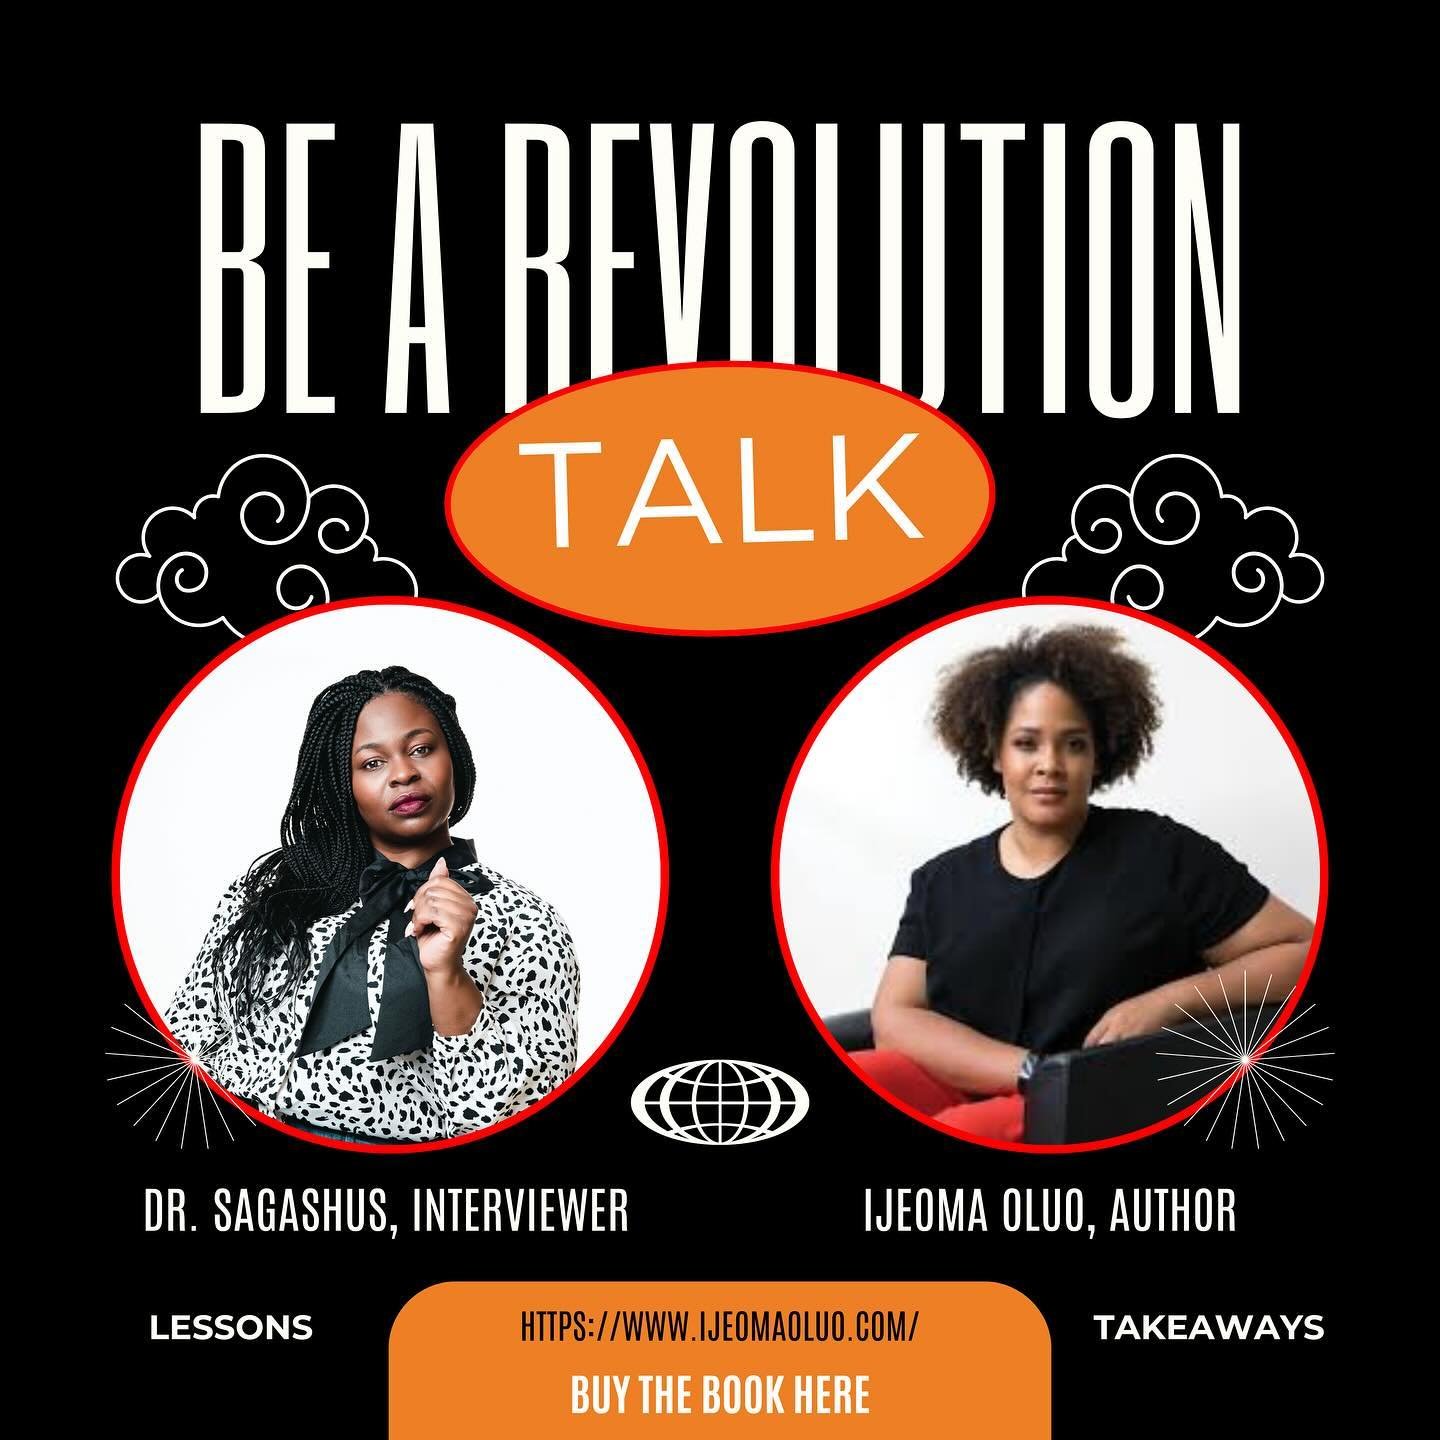 This Financial Literacy Month, we're kicking off a series on money, power, and policy. Ijeoma Oluo&rsquo;s latest release, &quot;Be a Revolution,&quot; has ignited my passion for change, particularly in addressing wealth disparities.

After interview